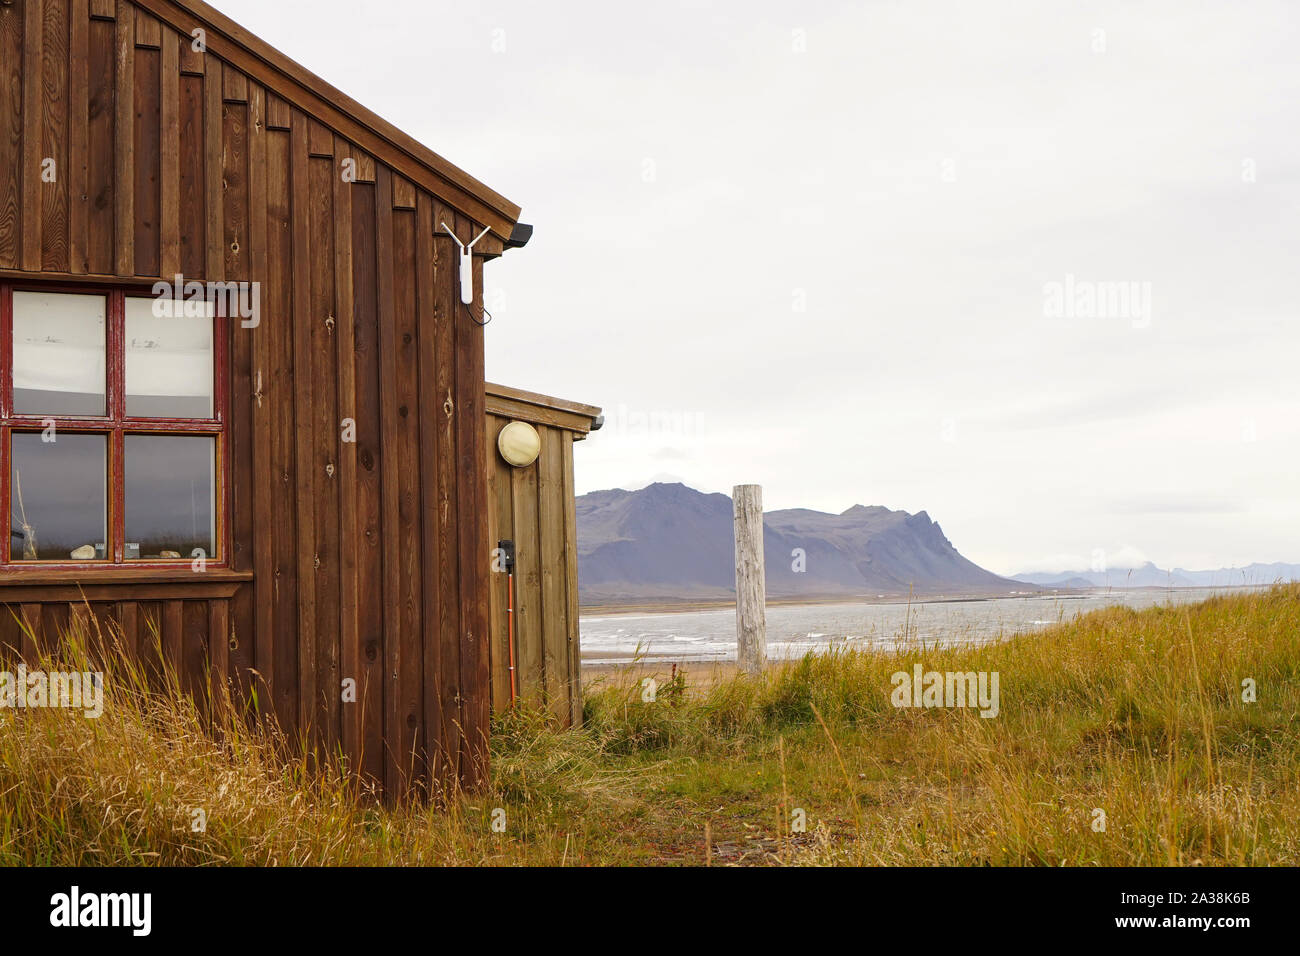 A traditional Icelandic wooden hut with mountain range in background Stock Photo